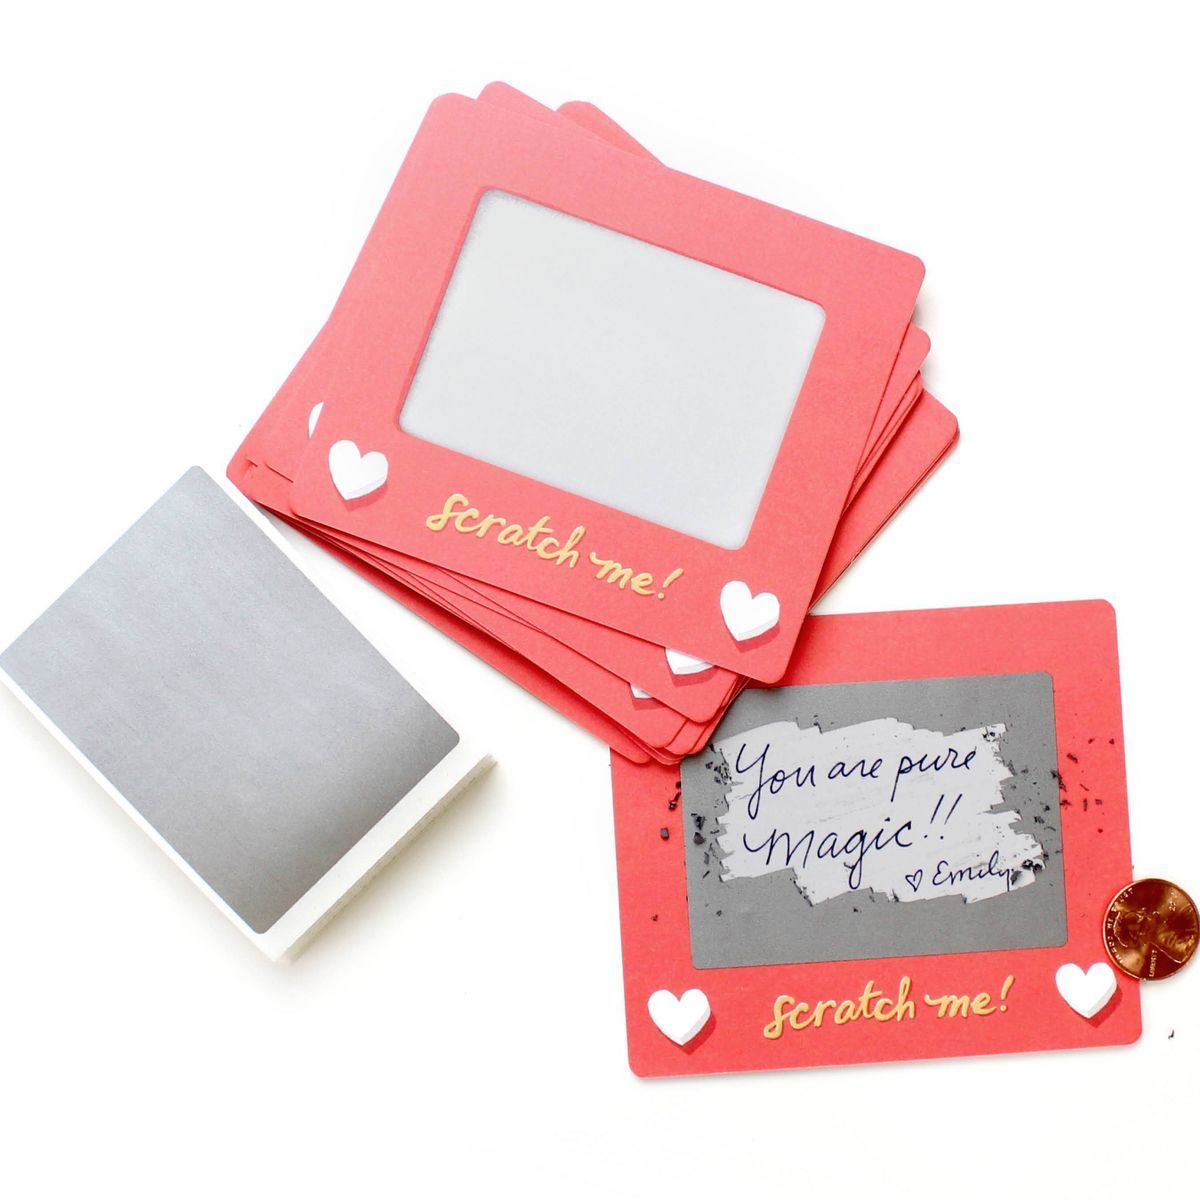 24ct Scratch Off Lunchbox Notes: Edition 4 Sketch | Target